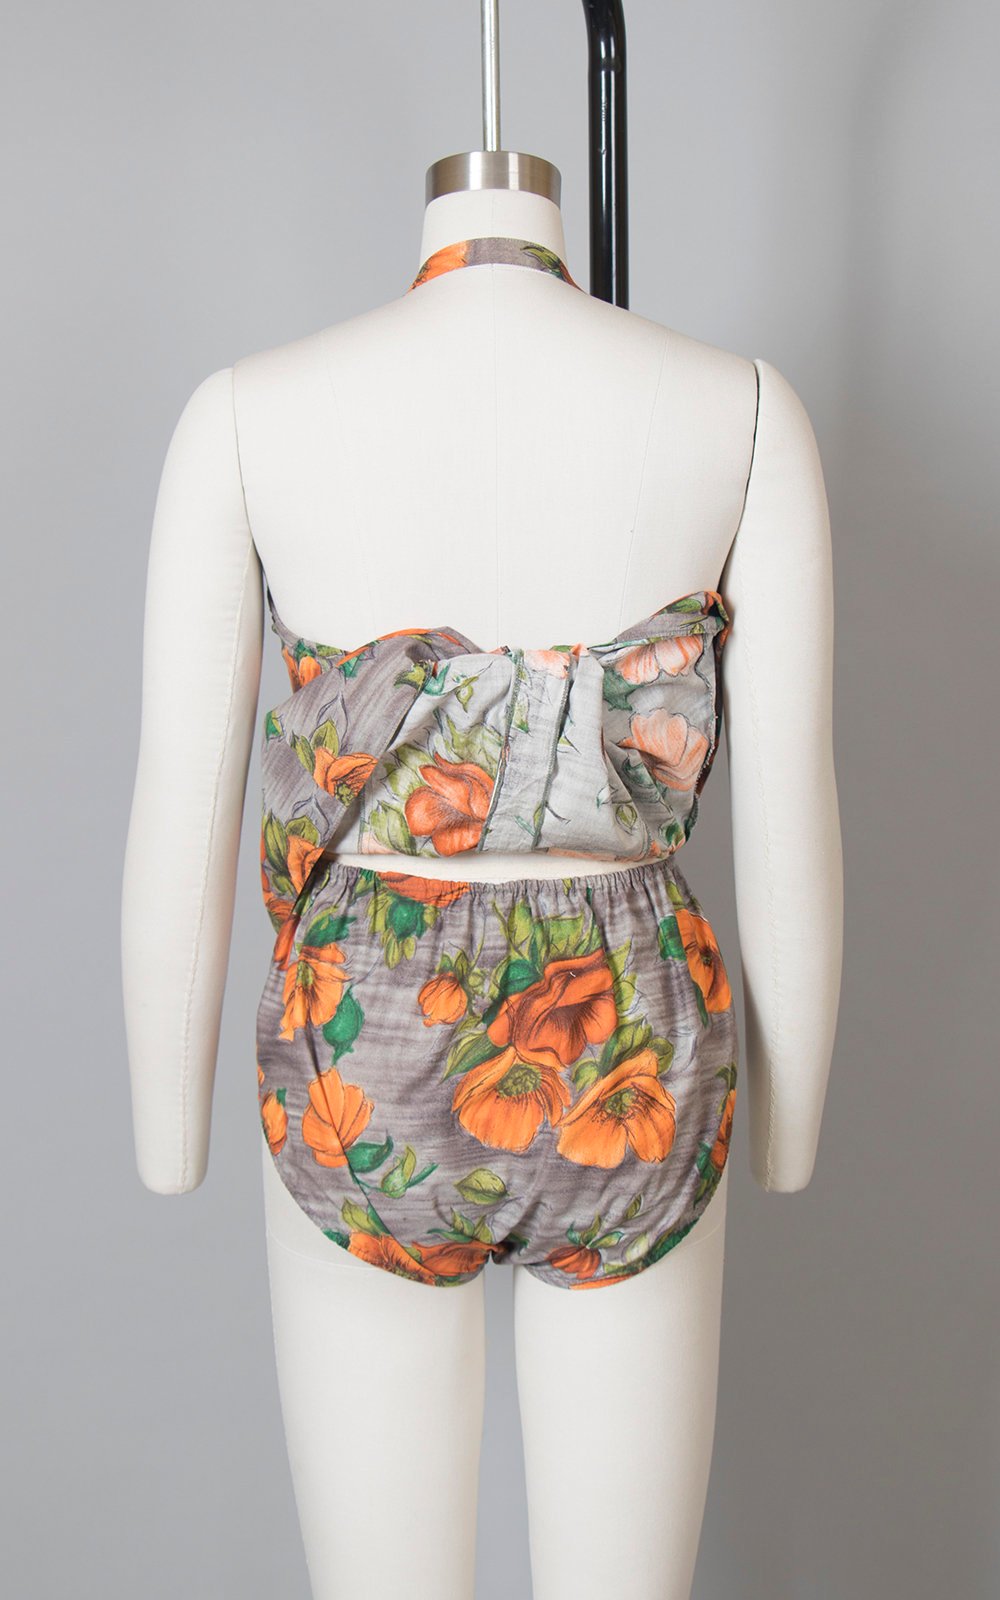 Vintage 1960s Swimsuit | 60s Poppy Floral Cotton Playsuit Halter Skirted Tankini Two Piece Bathing Suit (small)